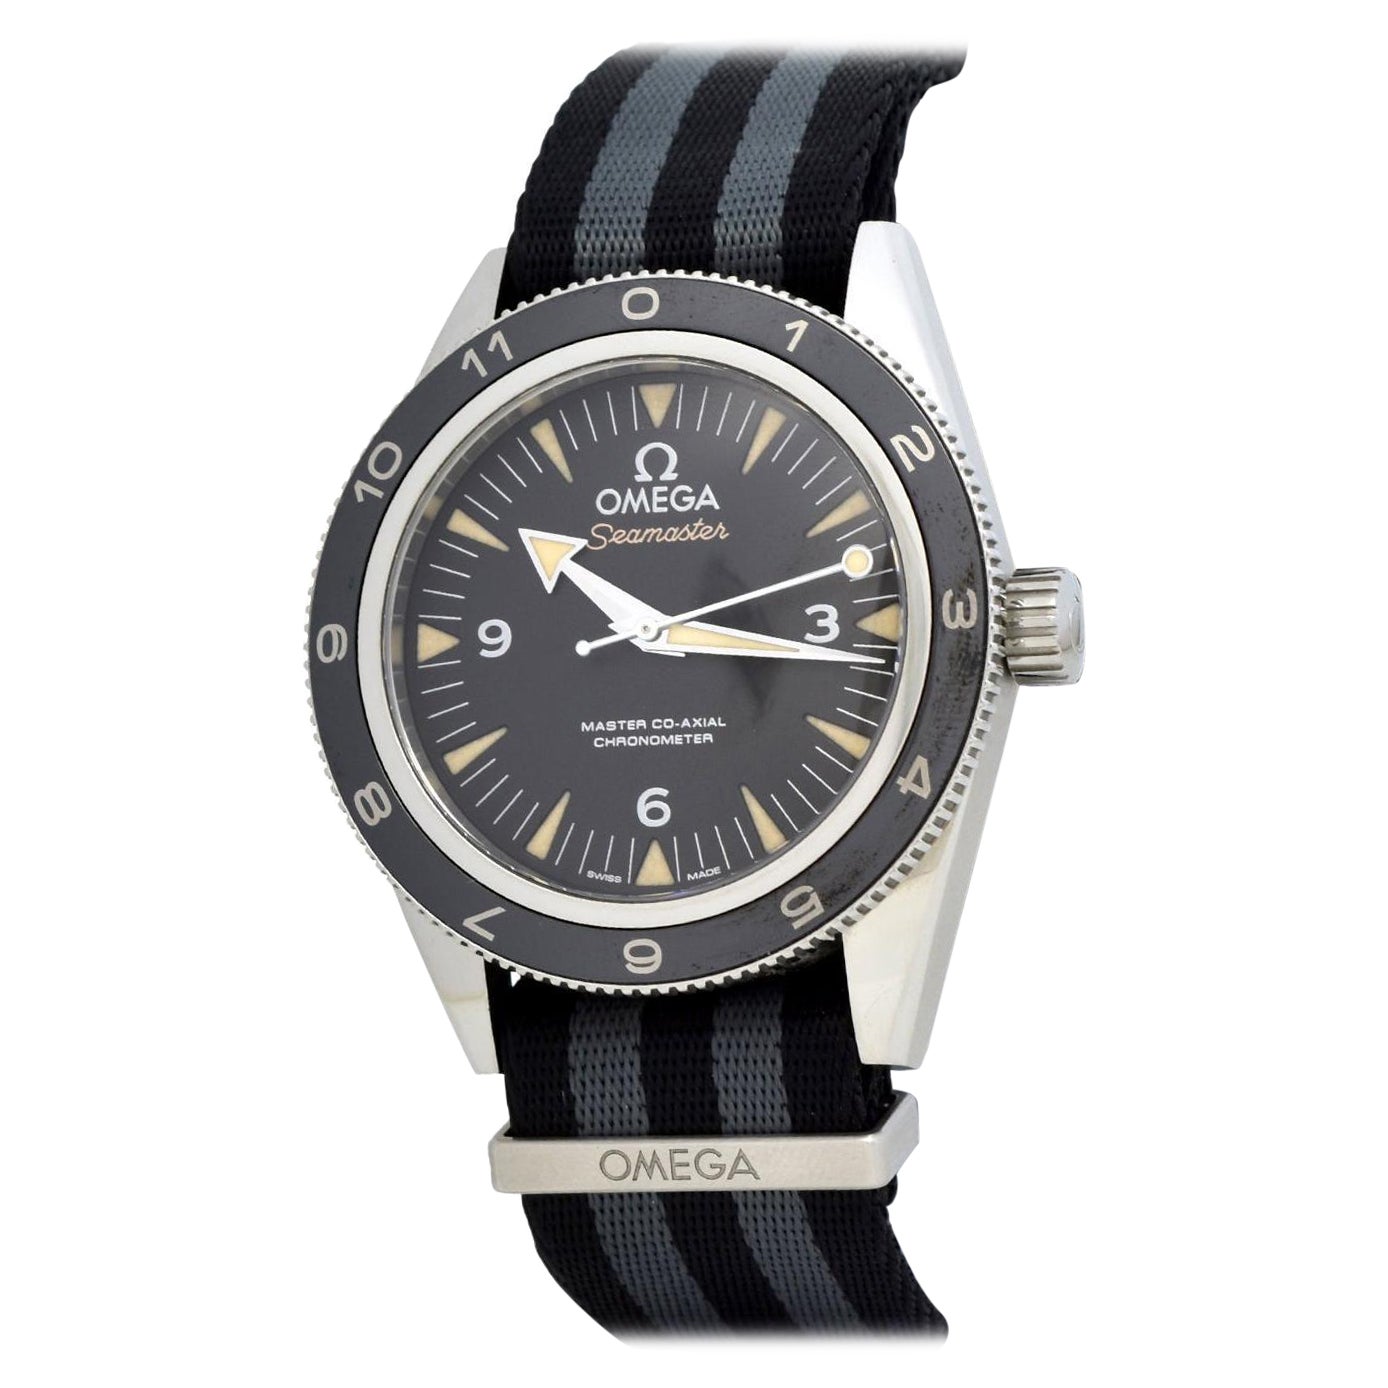 Omega Seamaster 300 Master Co-Axial "SPECTRE" Édition limitée